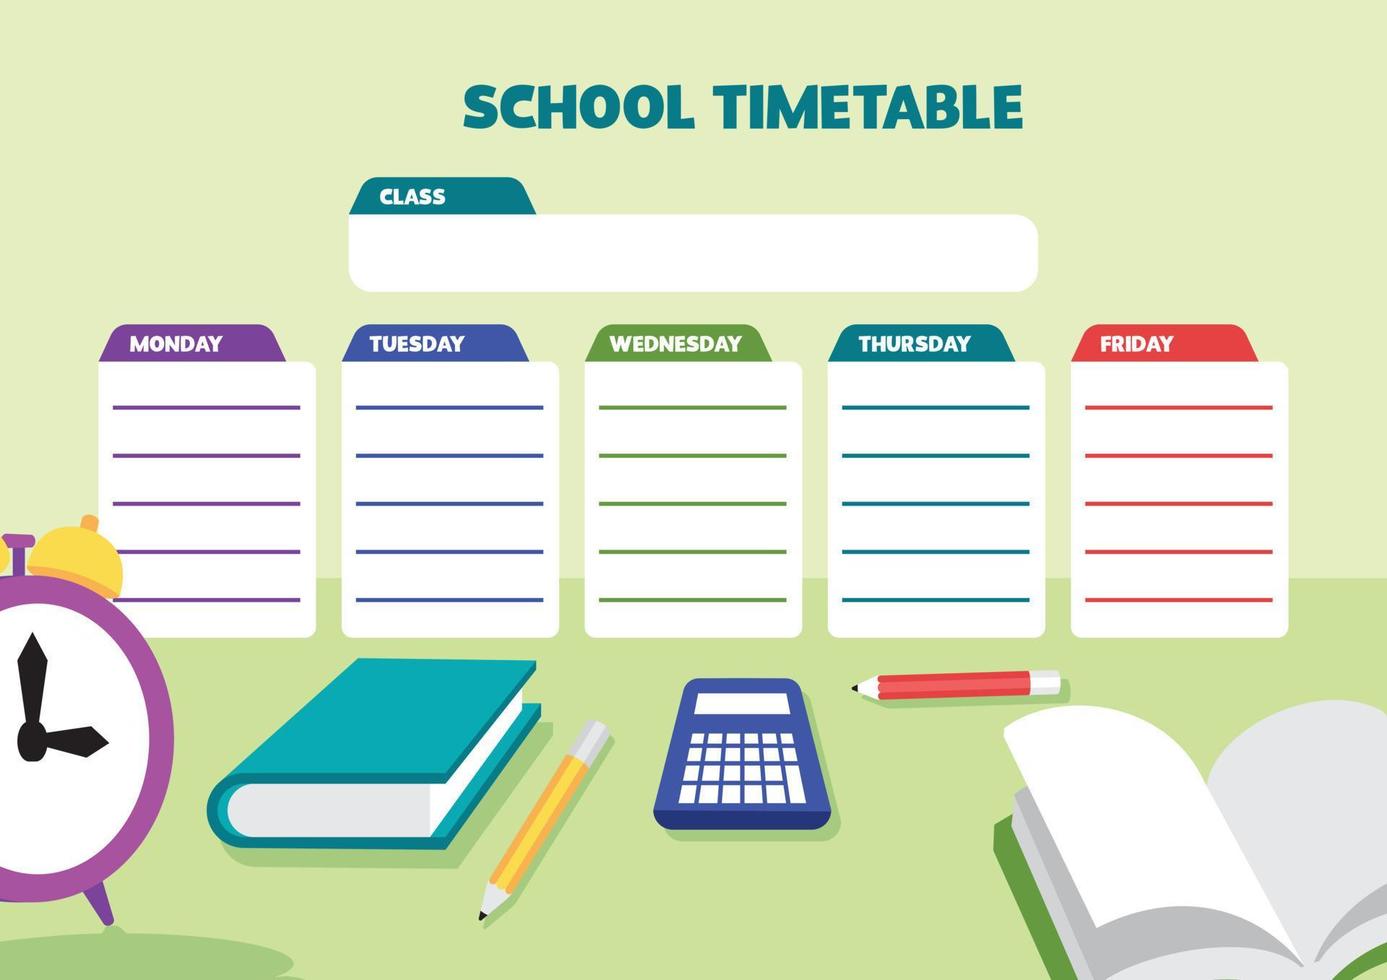 School timetable template week chart, lesson schedule template vector